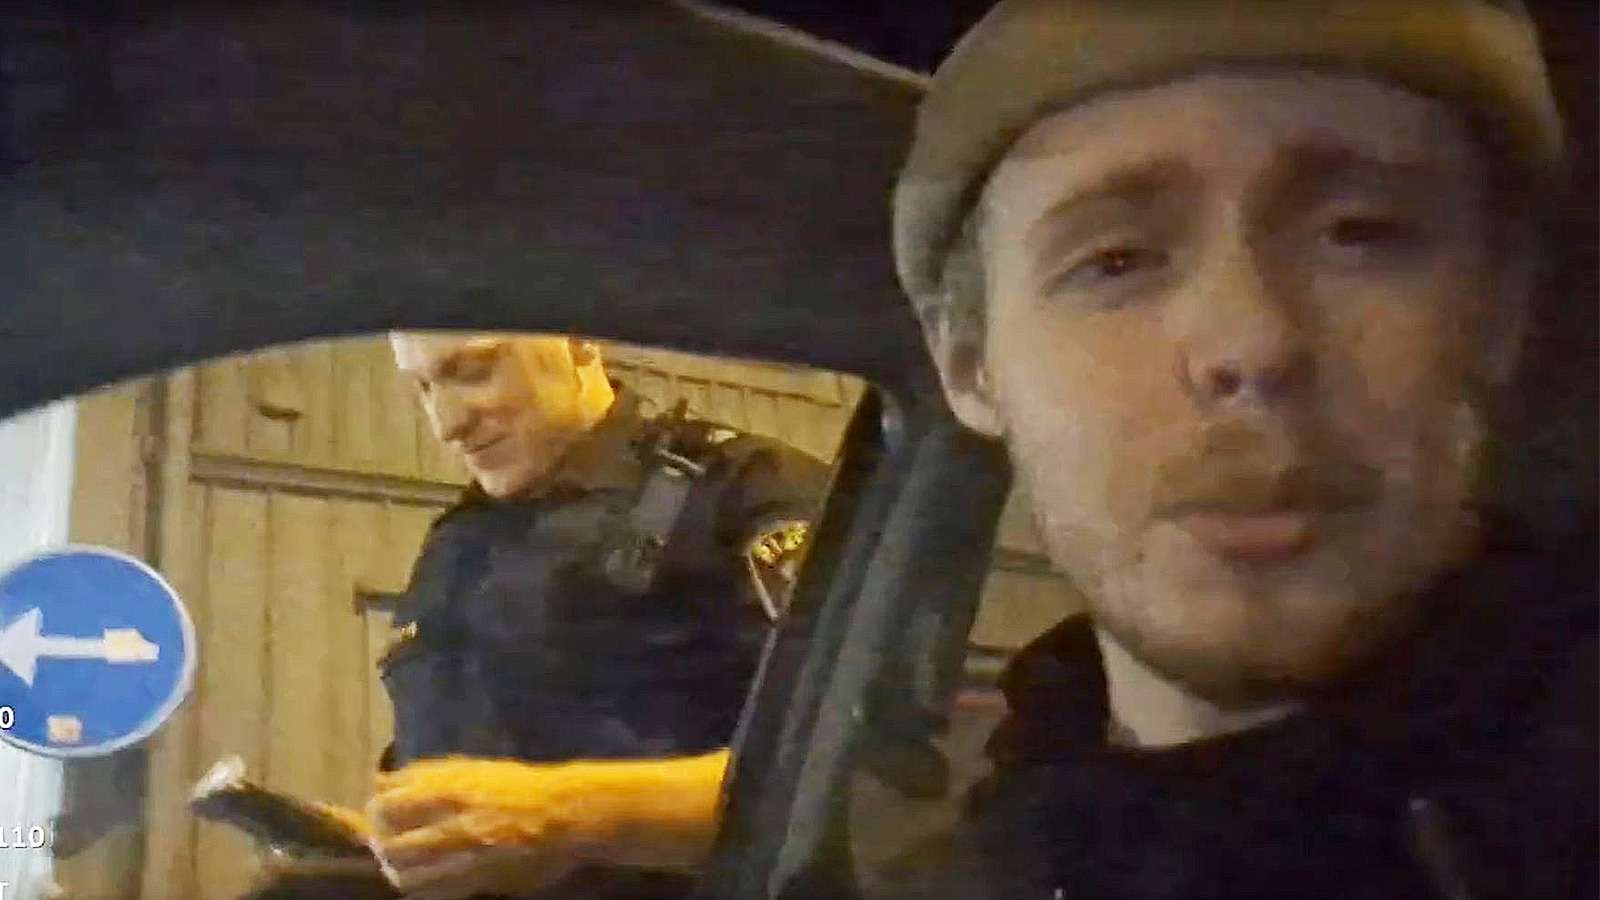 Twitch streamers chat spams fart sounds during traffic stop